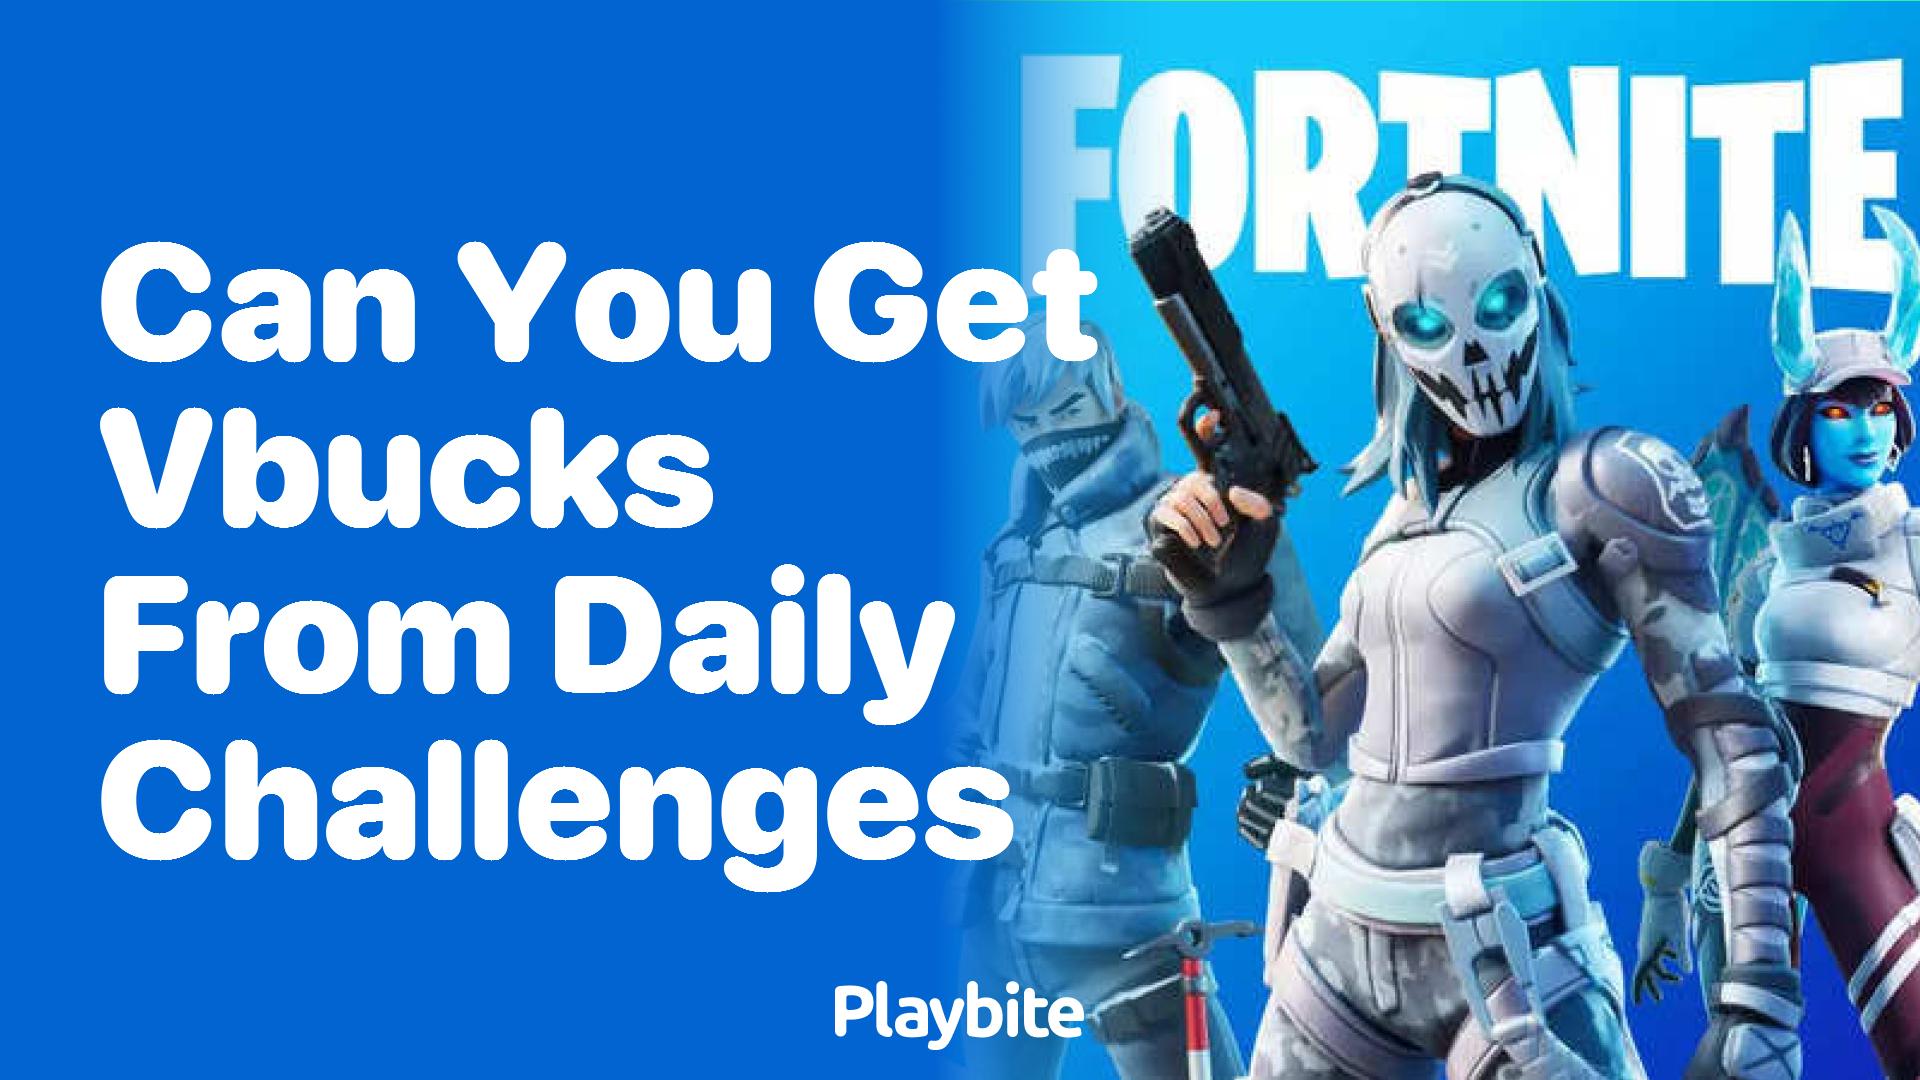 Can You Get V-Bucks From Daily Challenges in Fortnite?